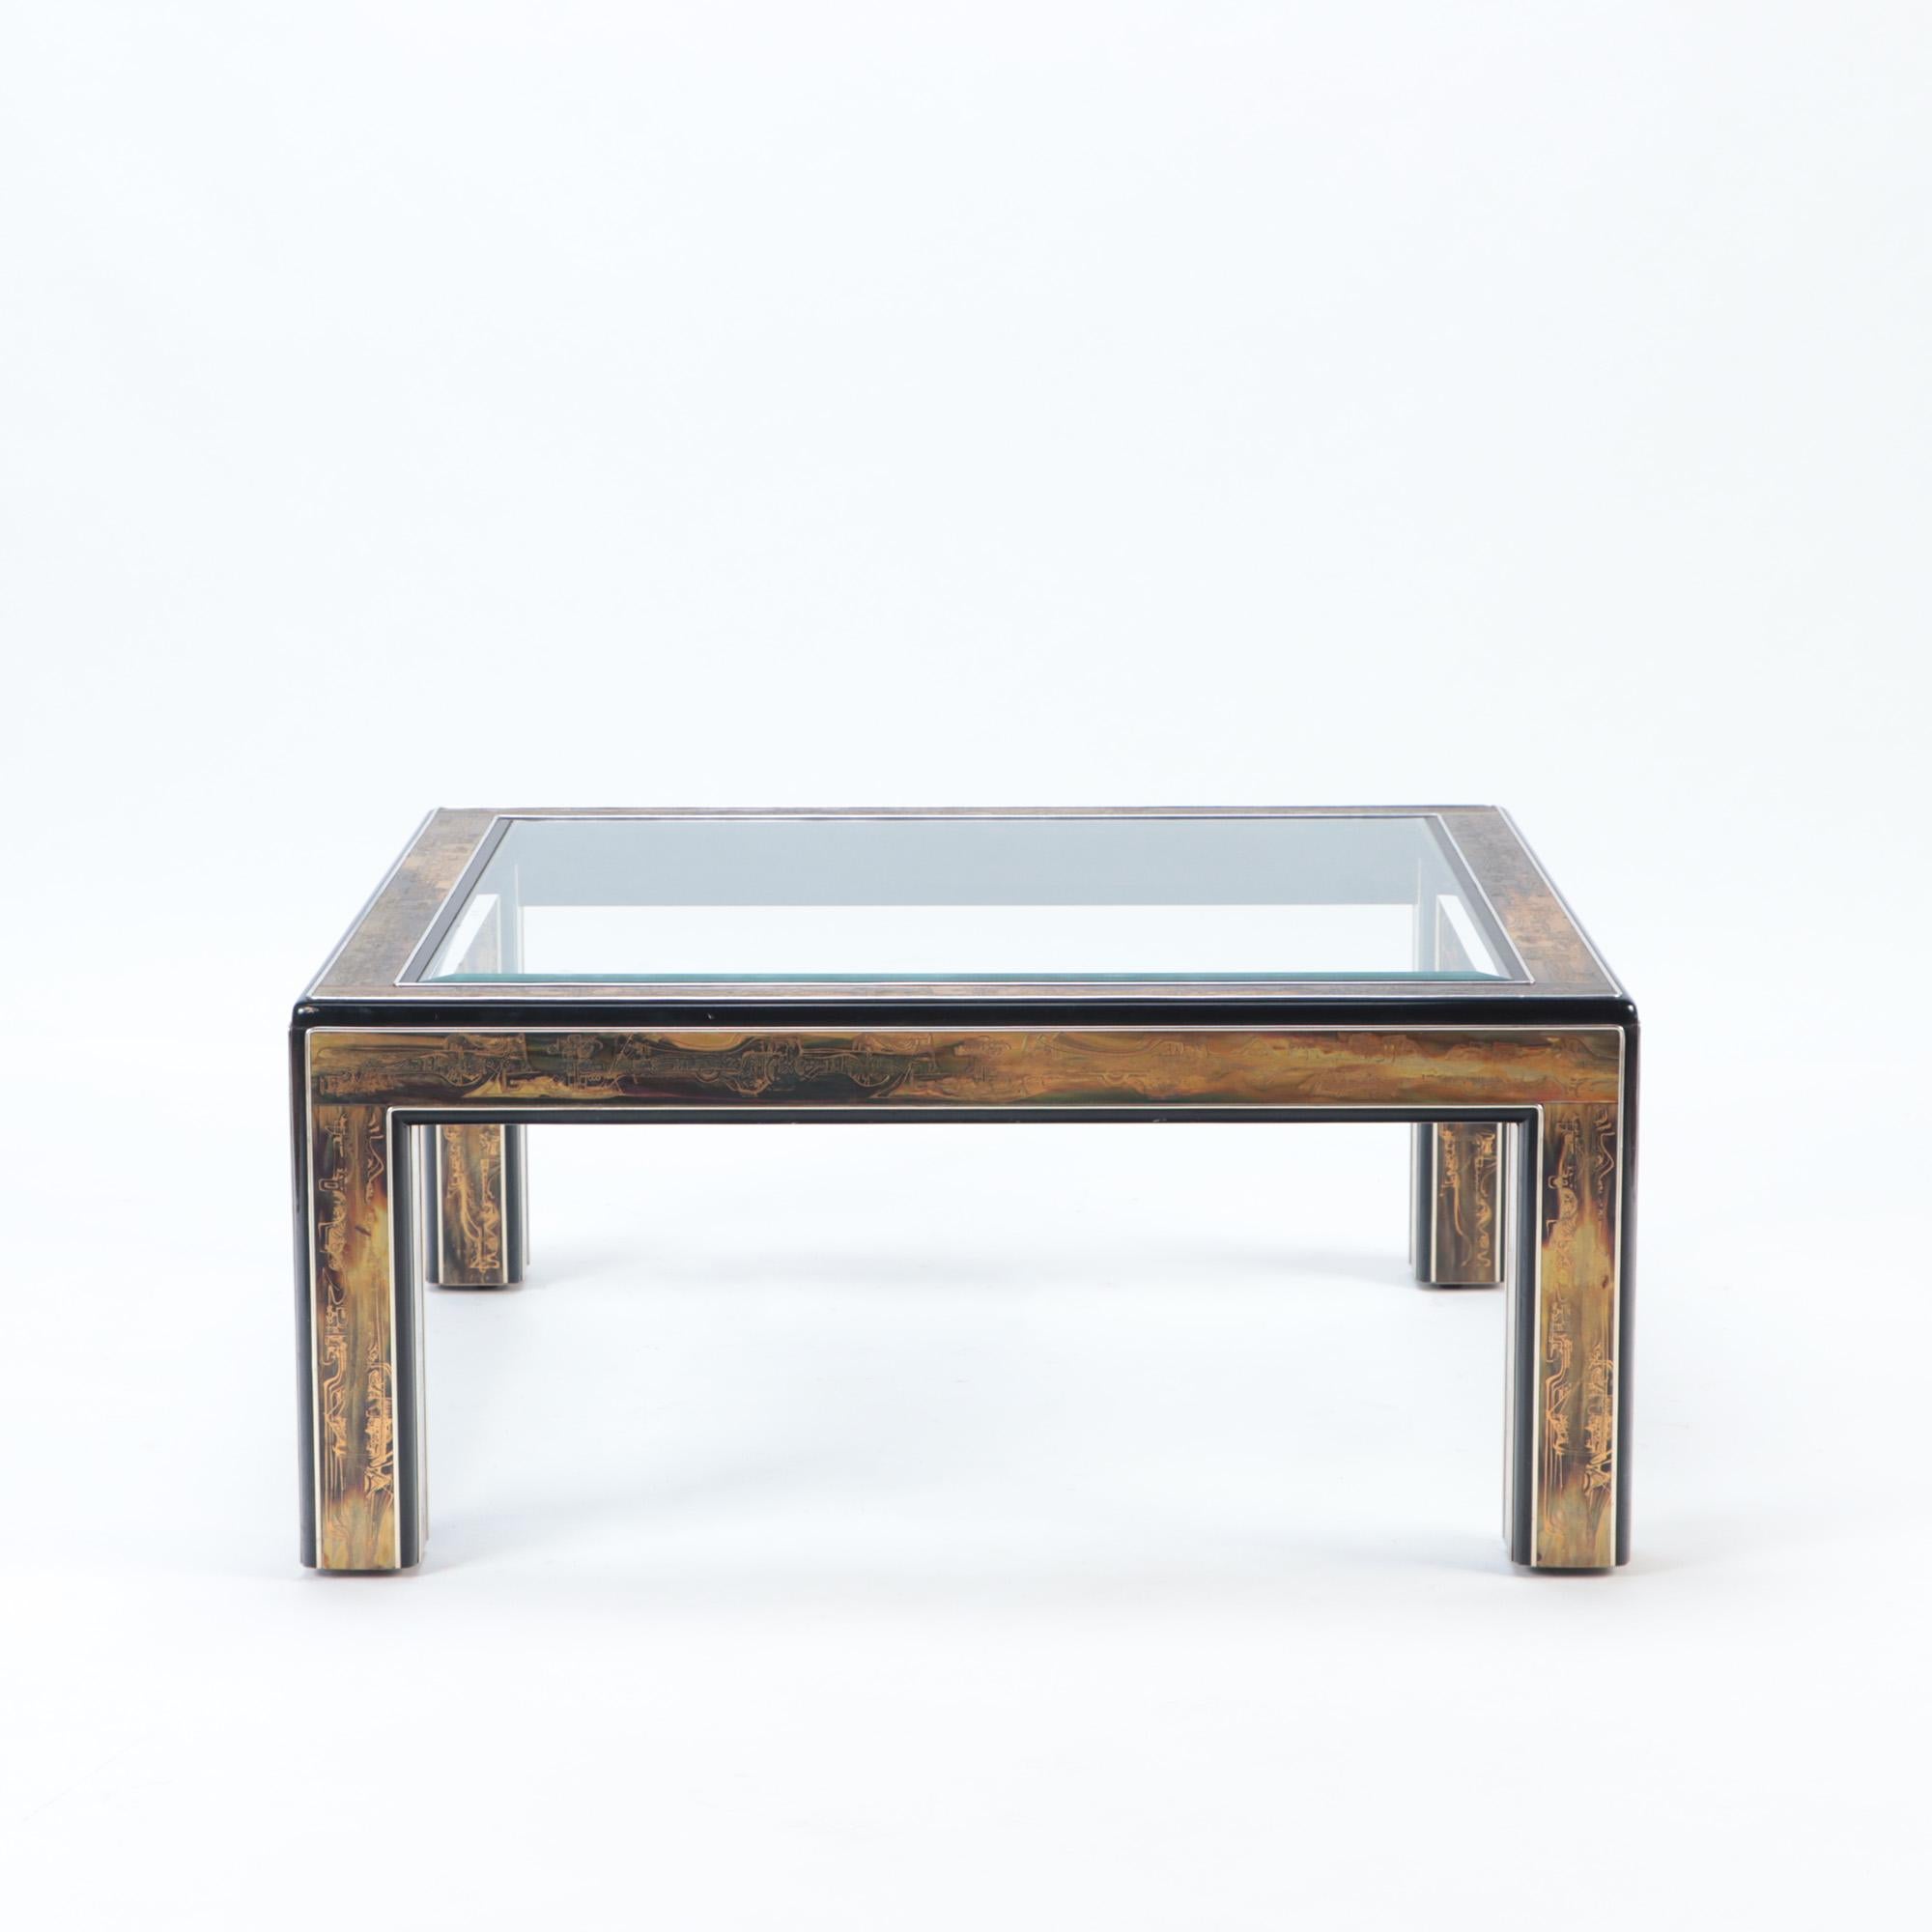 A Mid Century-Modern coffee table designed by Bernhard Rhone for Mastercraft. Mid 70s.